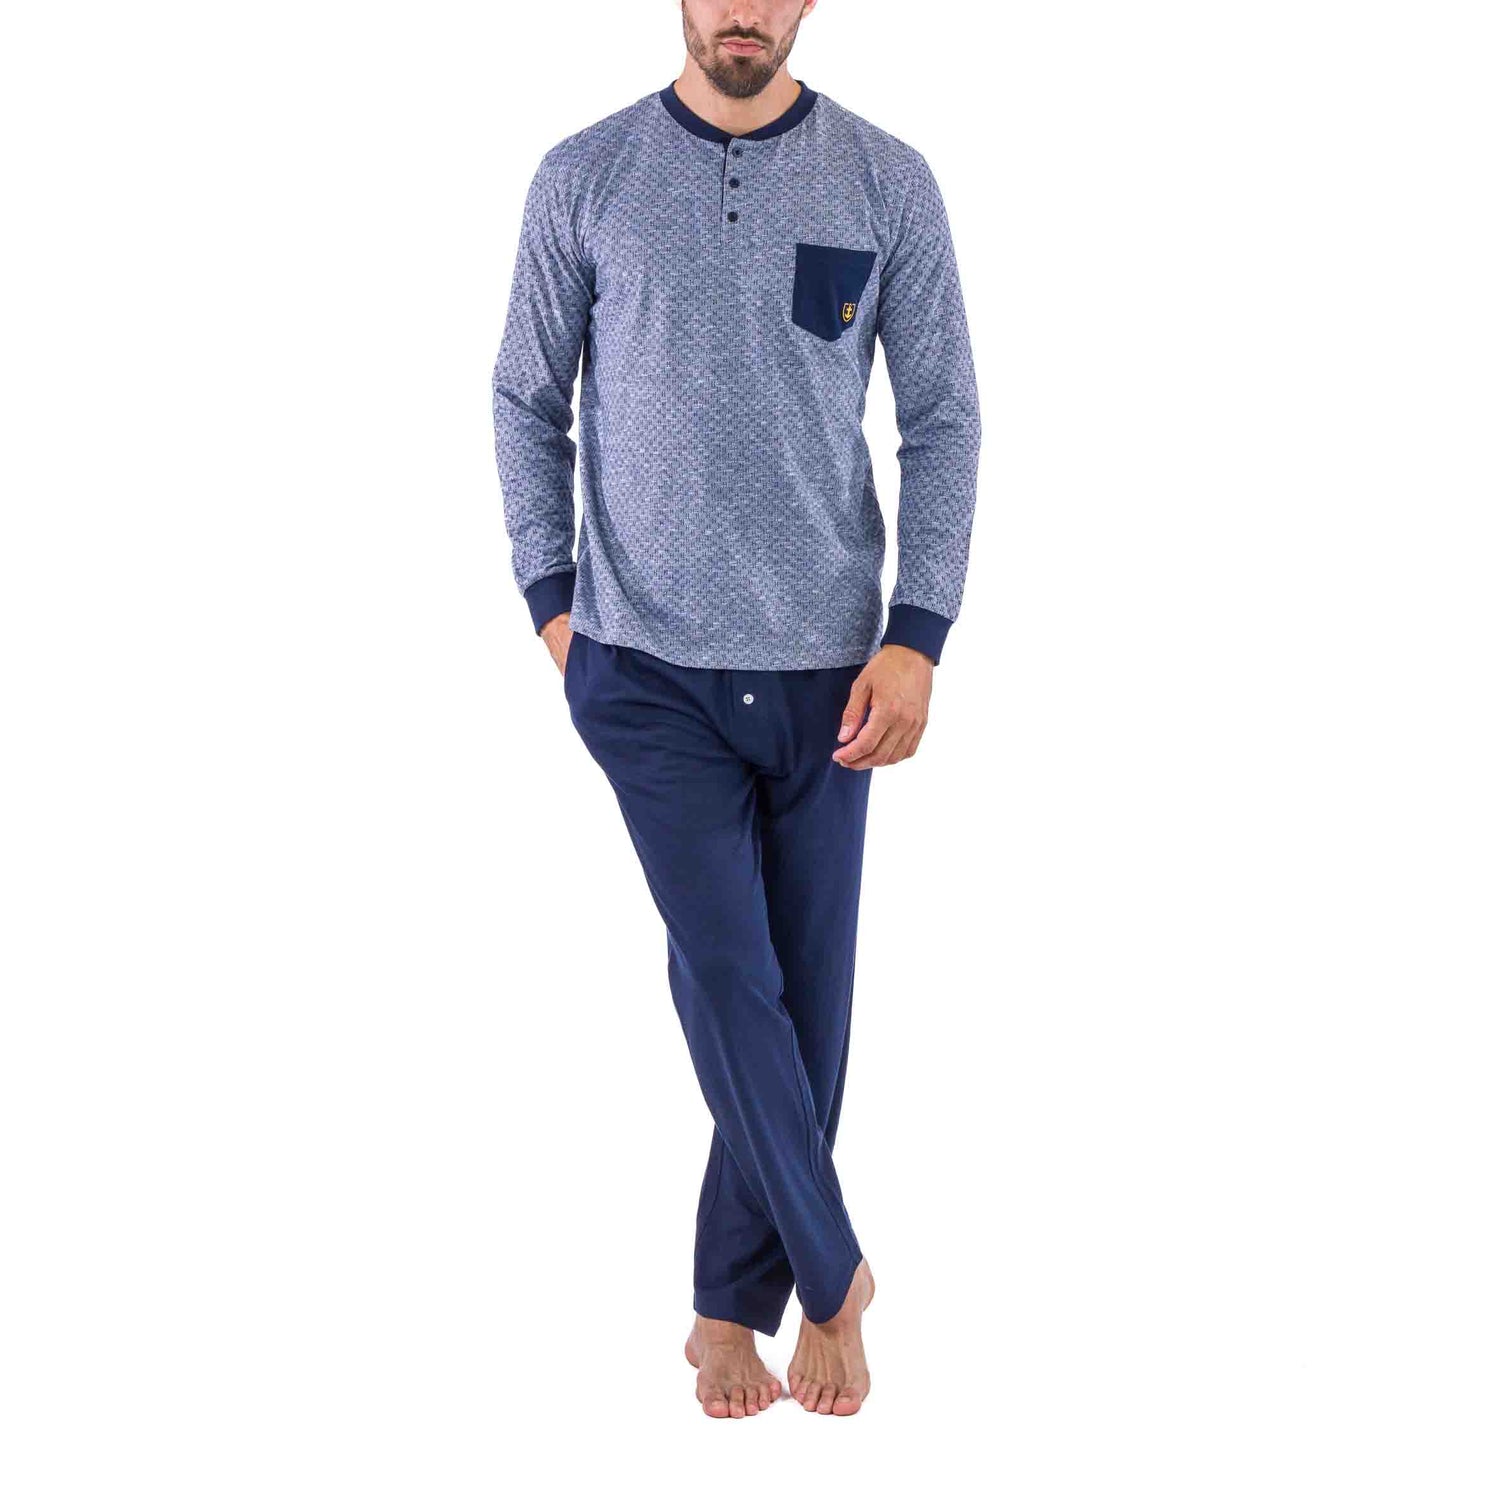 Navy Jacquard Knit Cotton Jersey Pajamas with Buttoned Collar